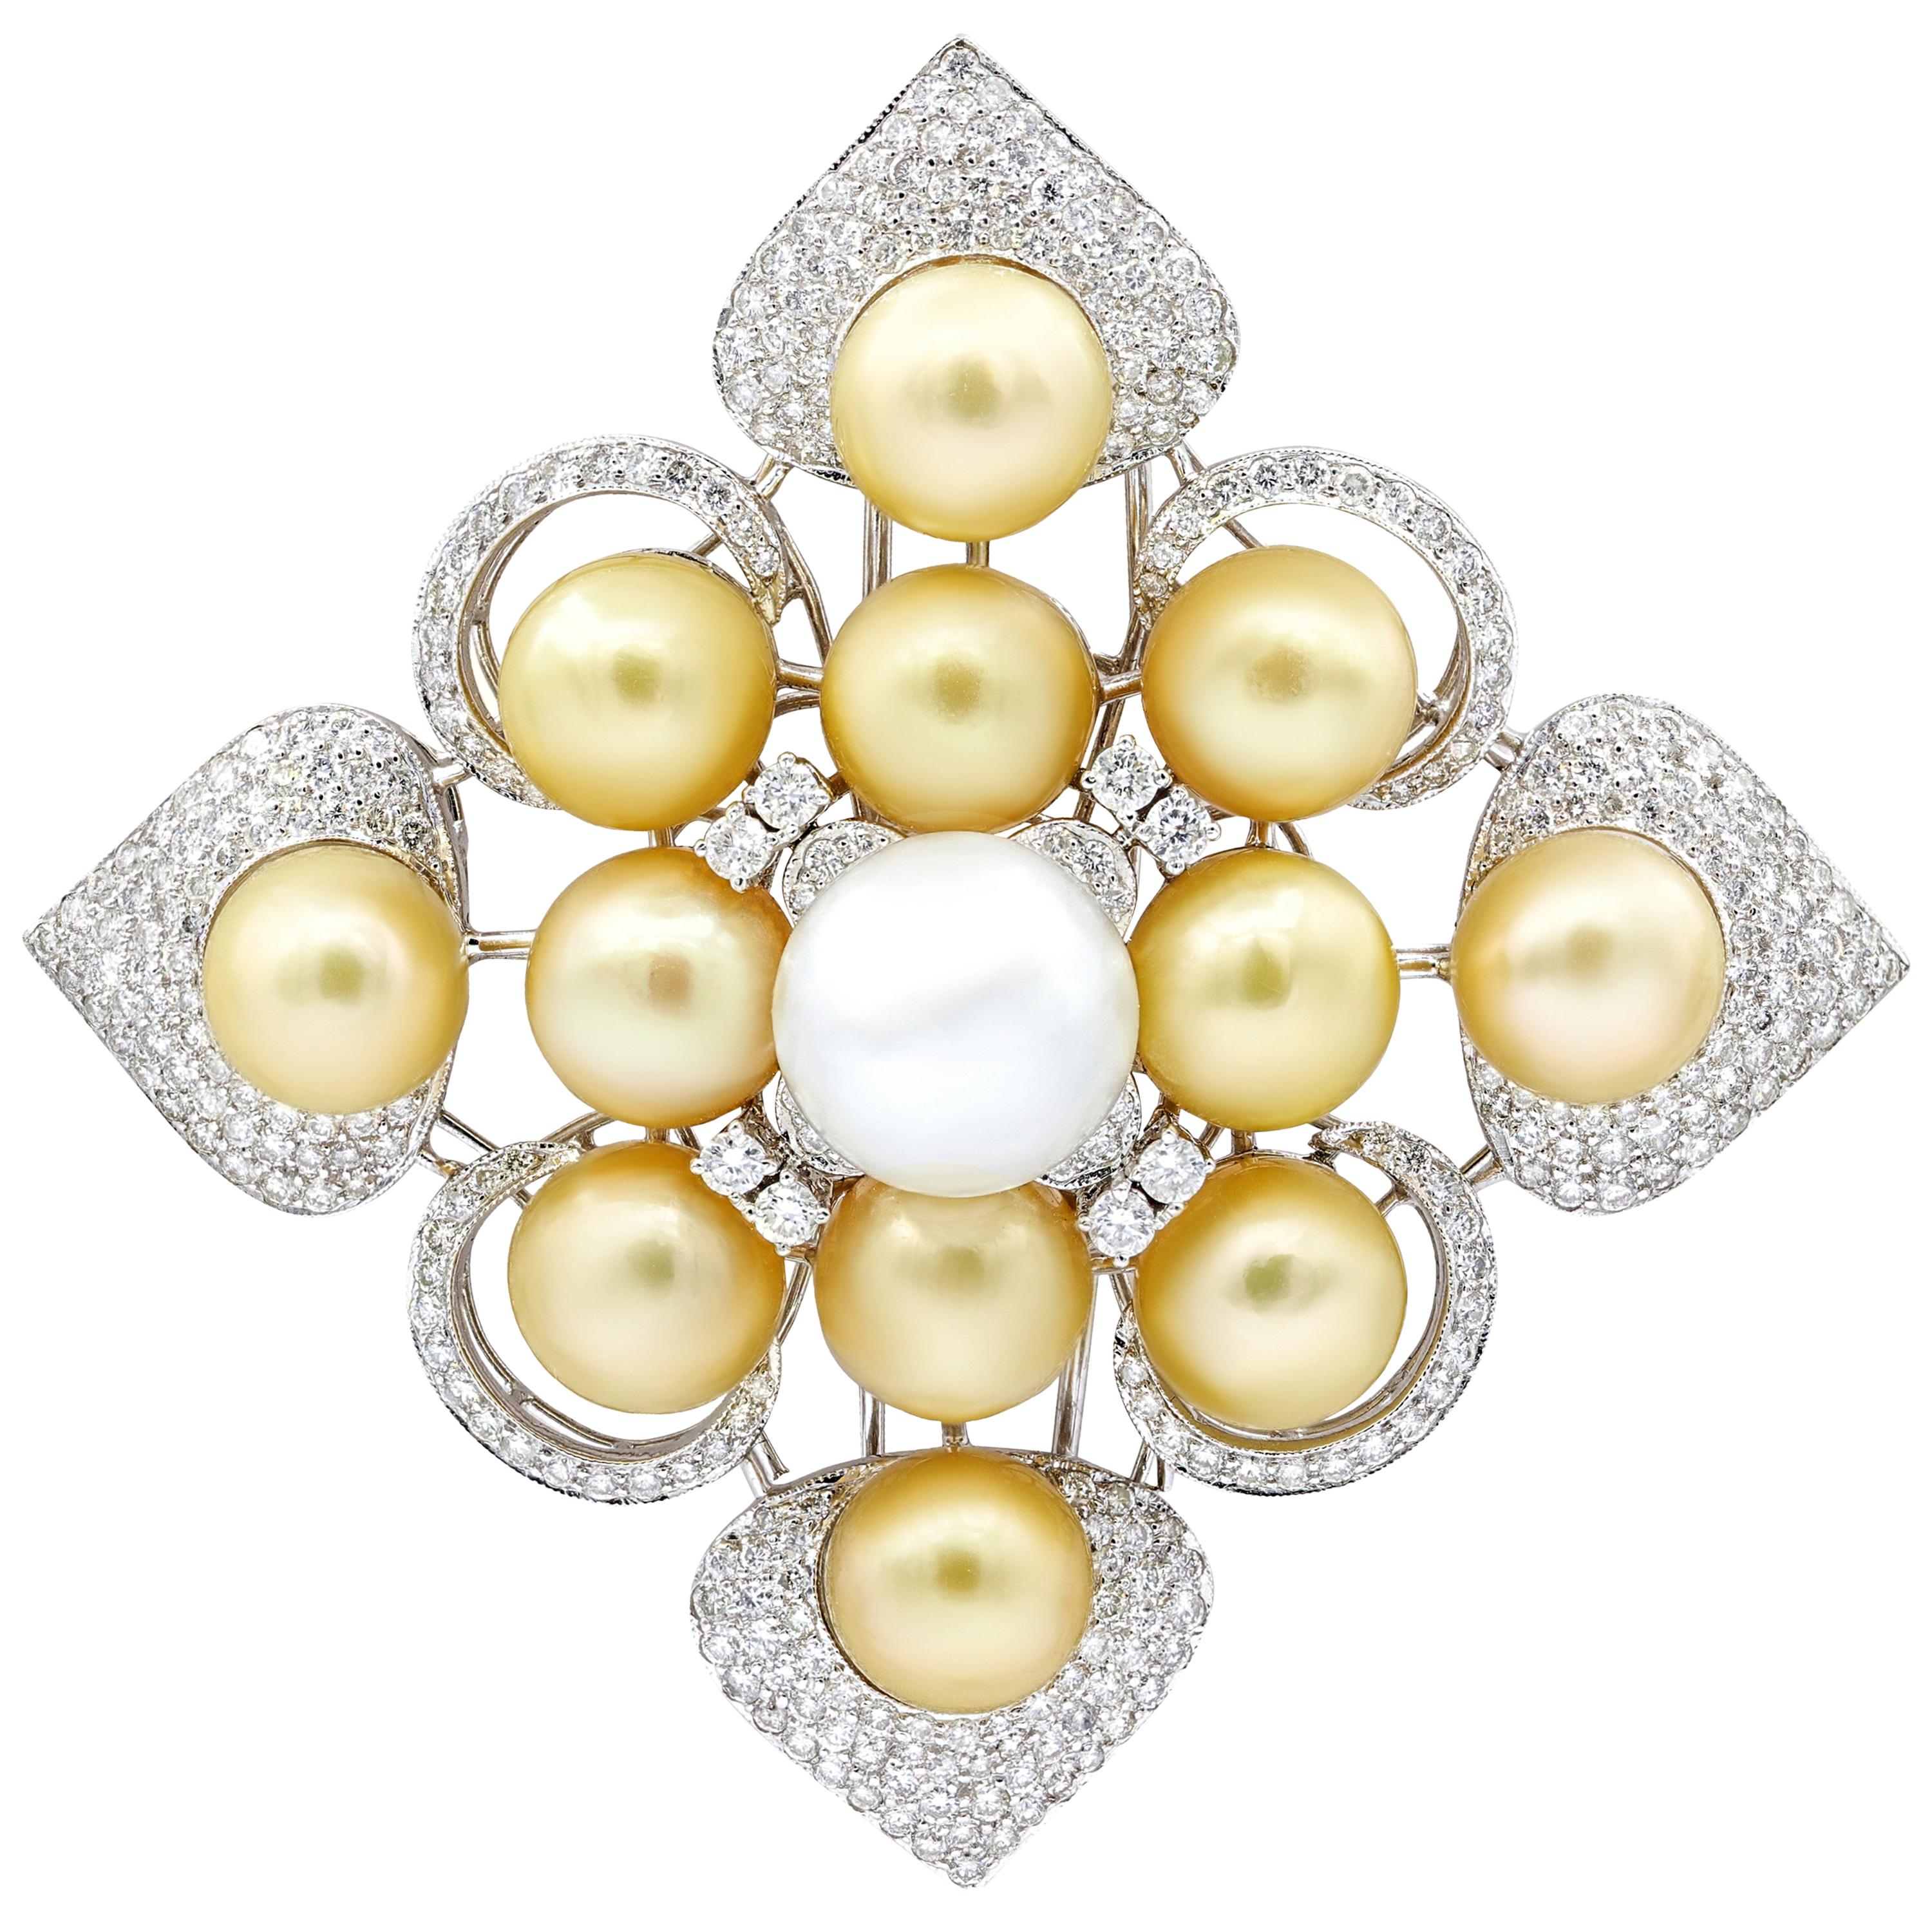 White Gold White and Champagne Pearls and Diamonds Brooch